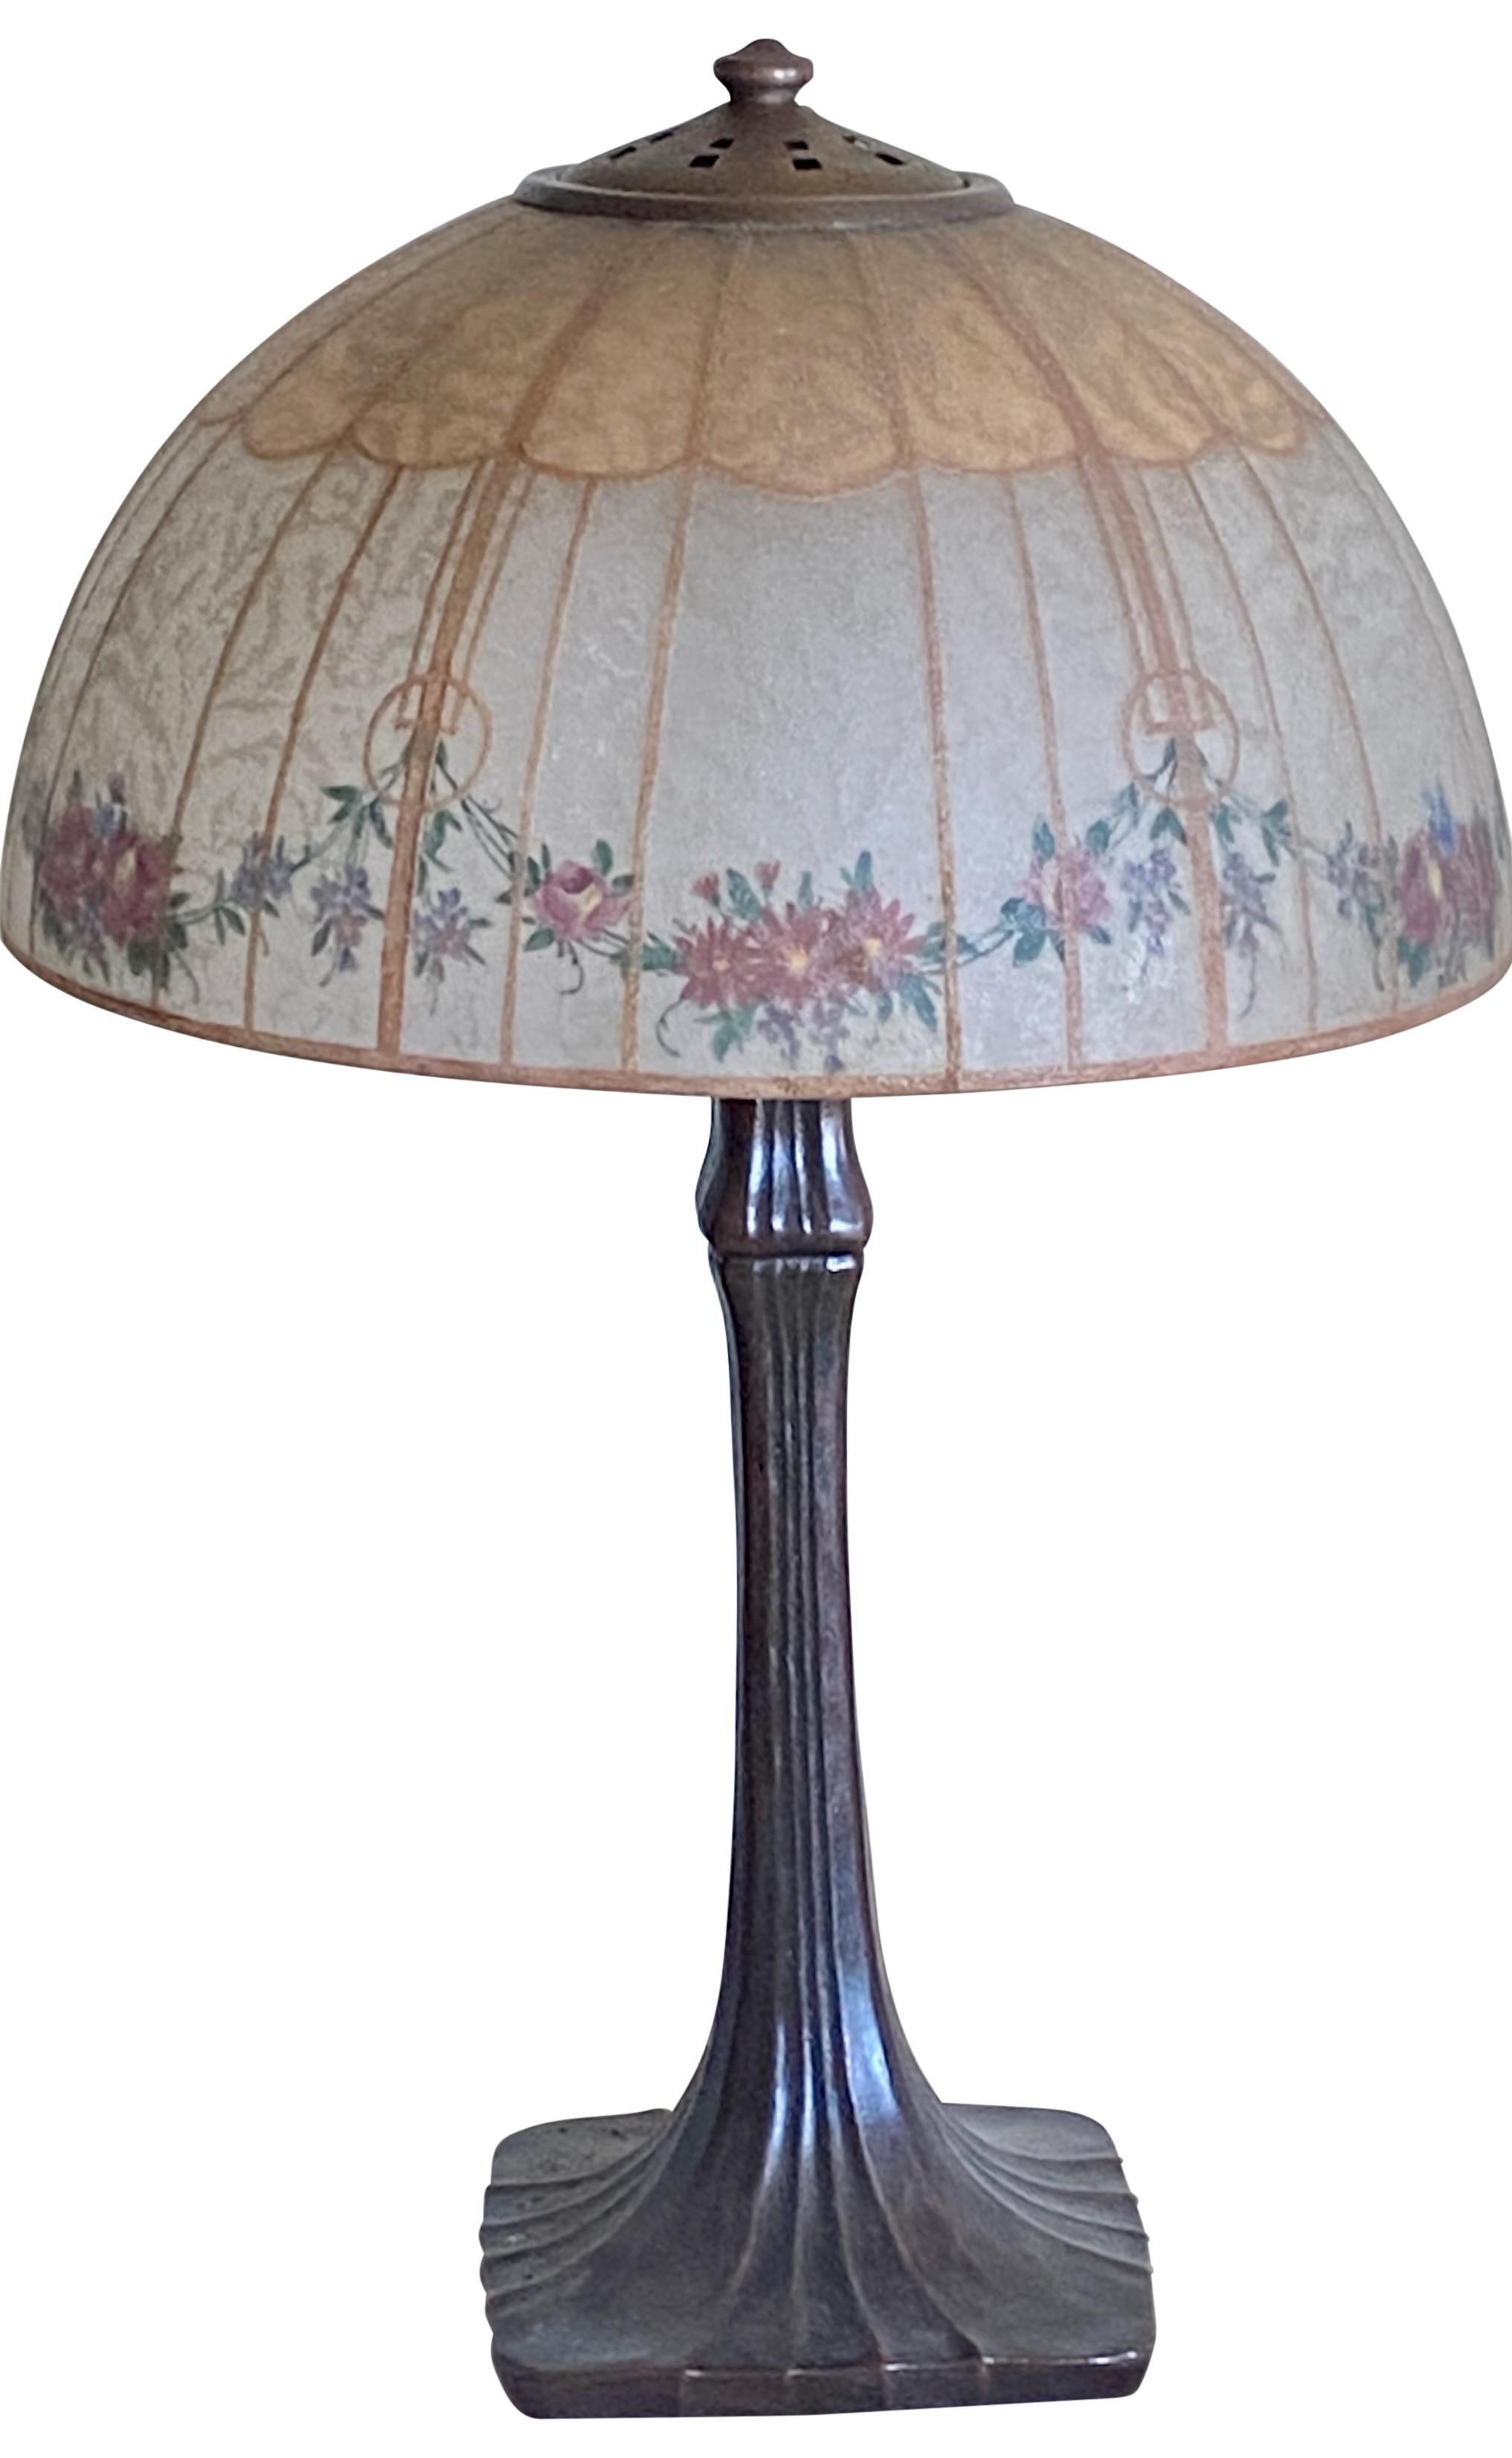 American Arts and Crafts period Handel table lamp (c1910-15) with original reverse hand painted glass shade. 
Signed Handel on shade, top brass ring and also on the base.  
In excellent original antique condition.
Recently rewired.